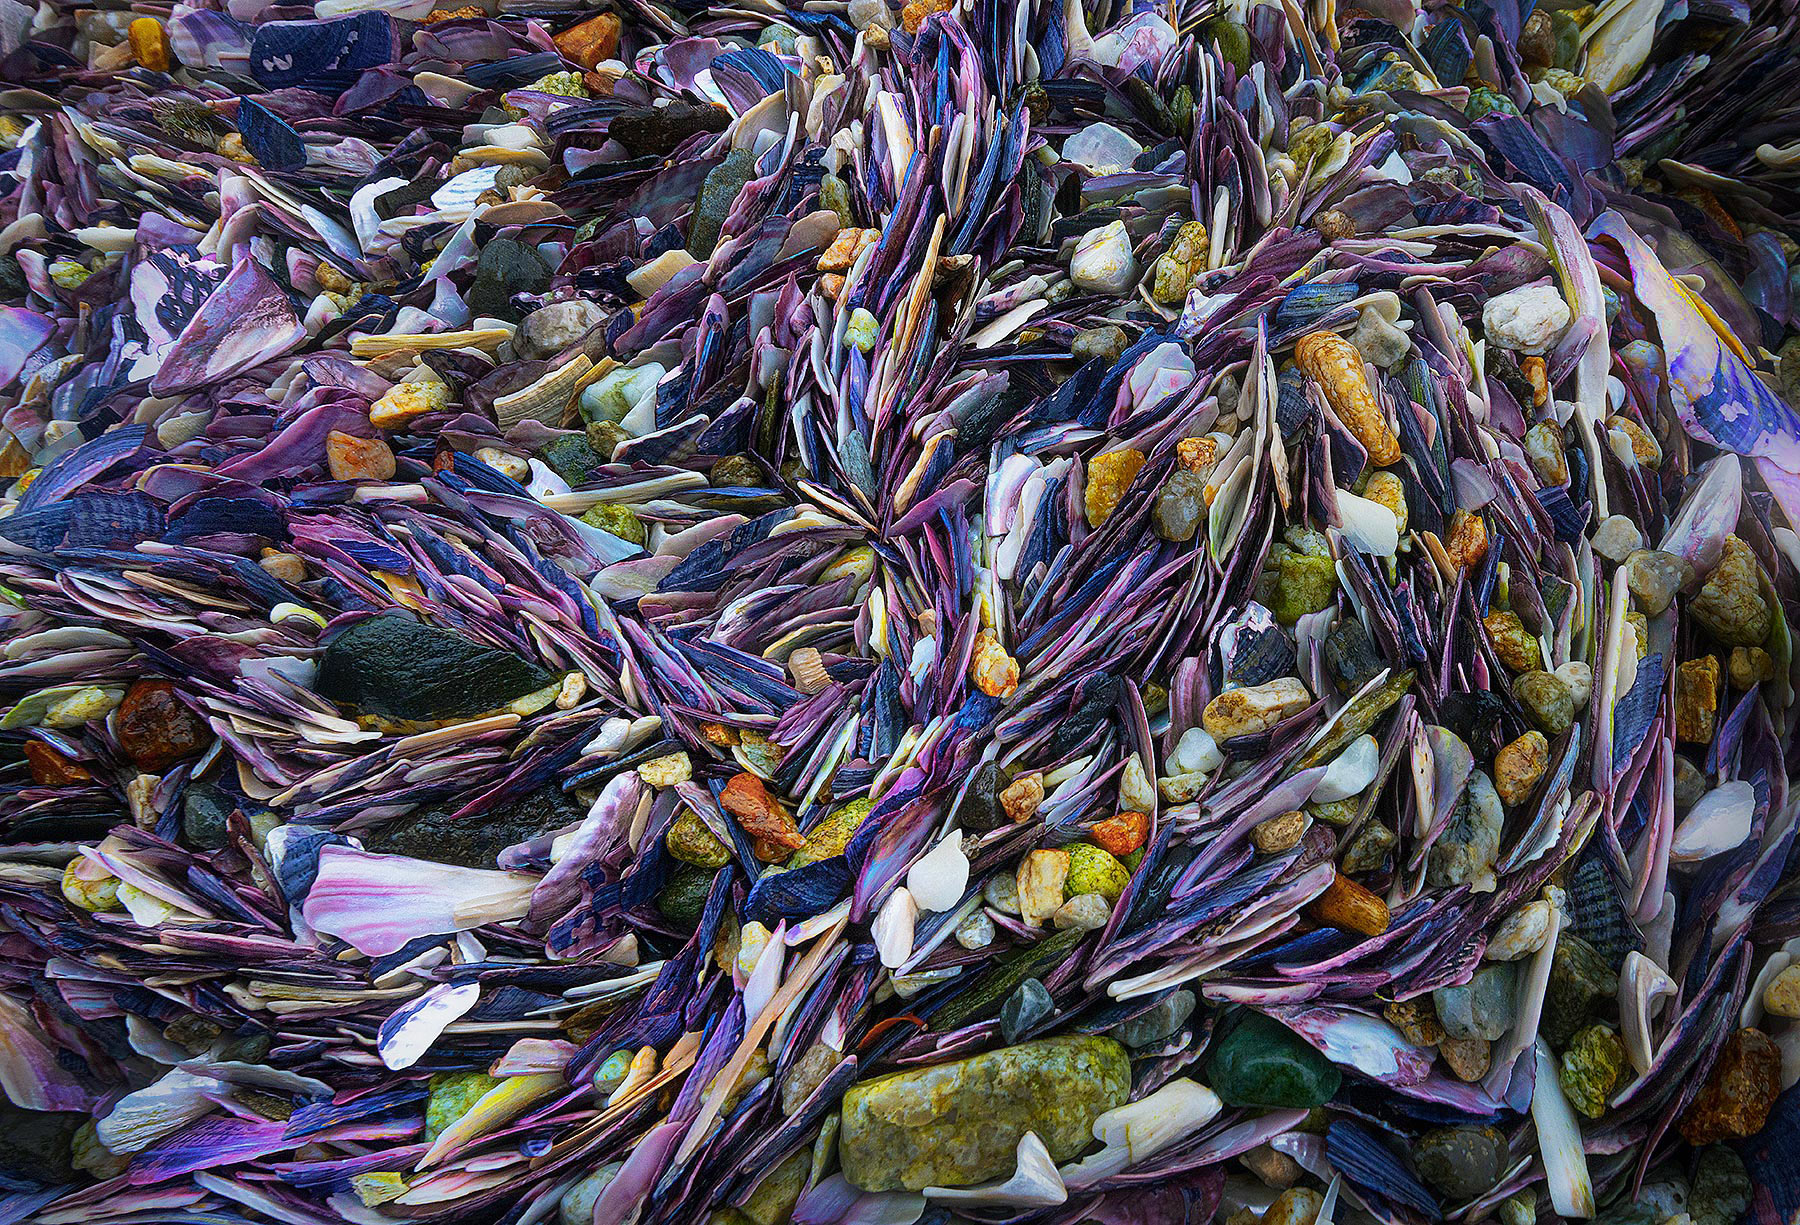 Oyster and mussel shells left behind on a beach in Patagonian Fjords near an ancient fishing camp